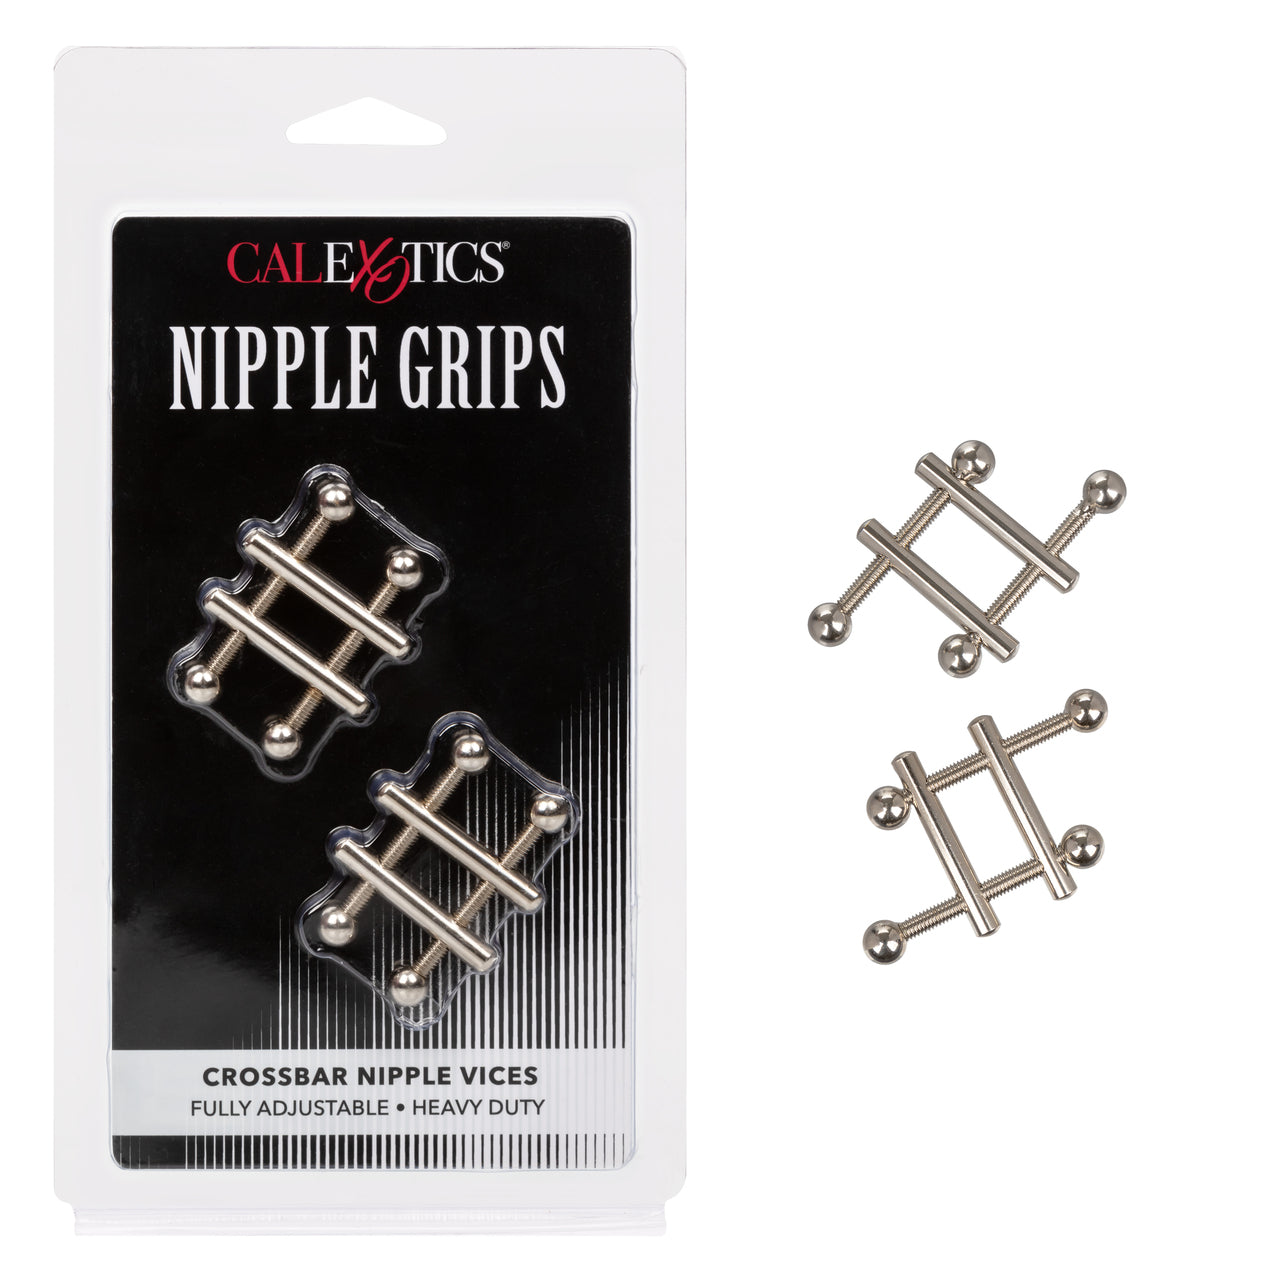 The Nipple Grips Crossbar Nipple Vices by Calexotics Buy in Toronto online or in-store  Edit alt text